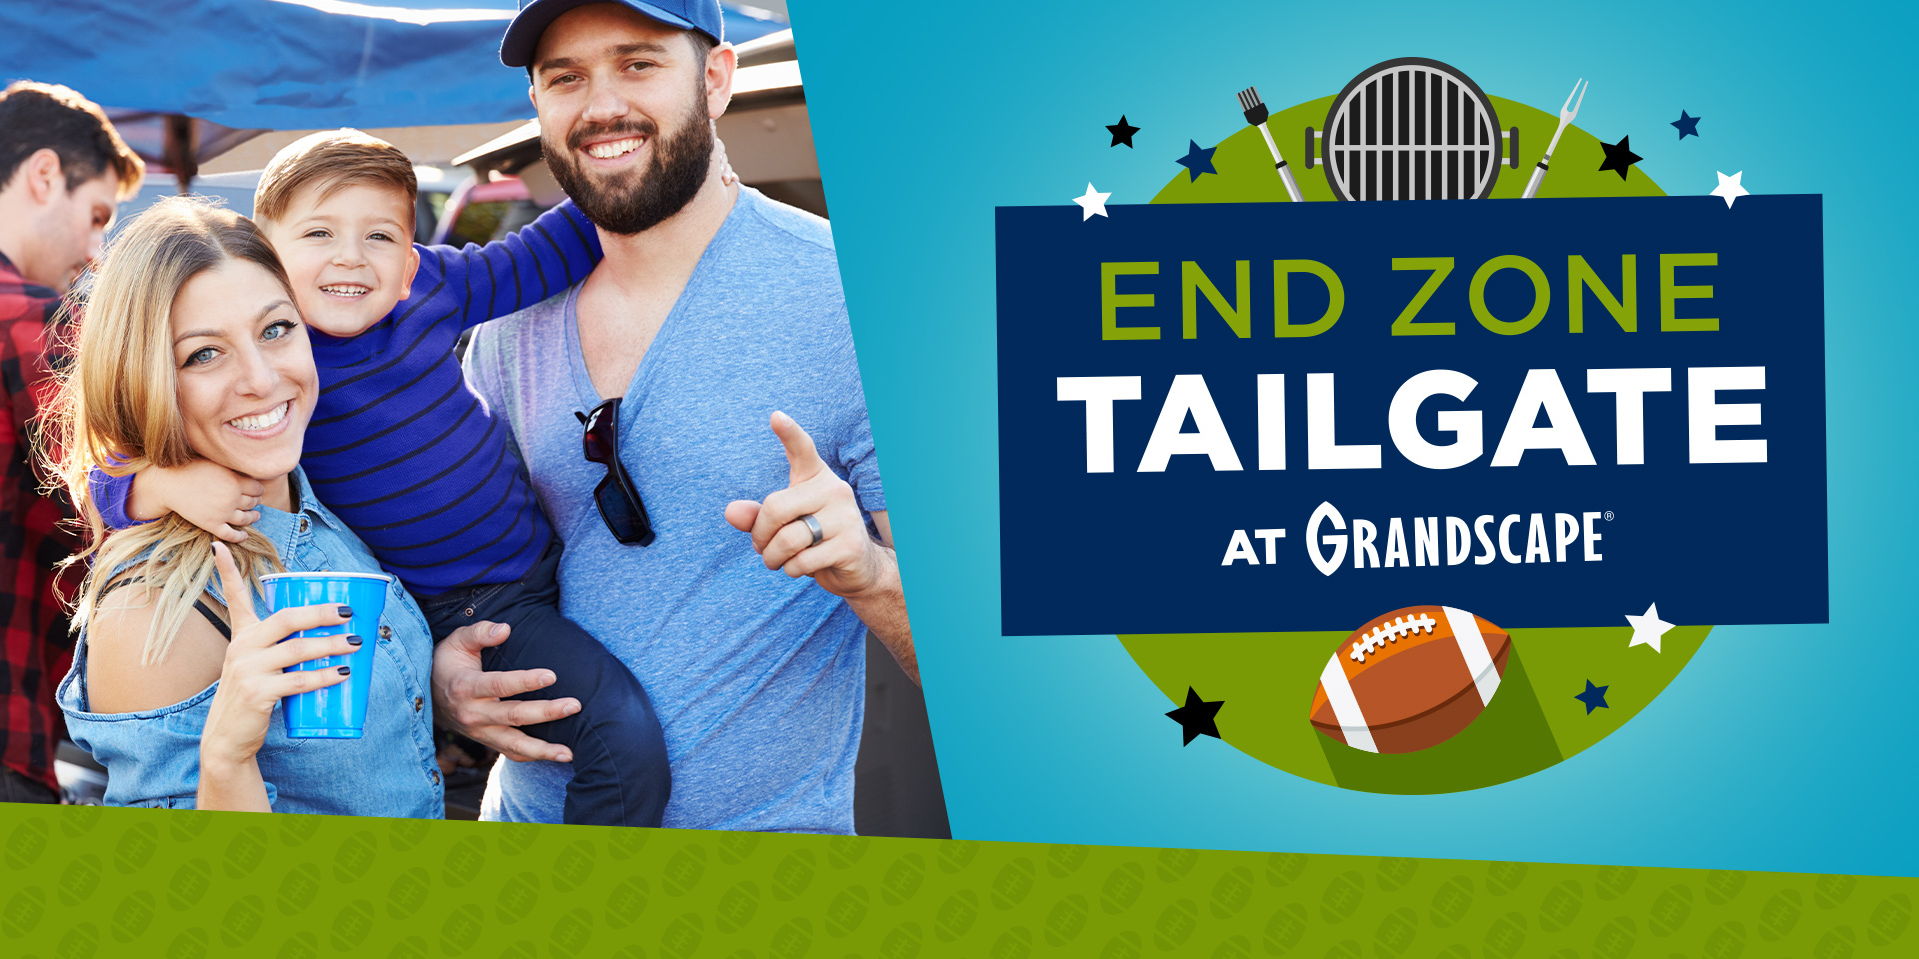 End Zone Tailgate promotional image